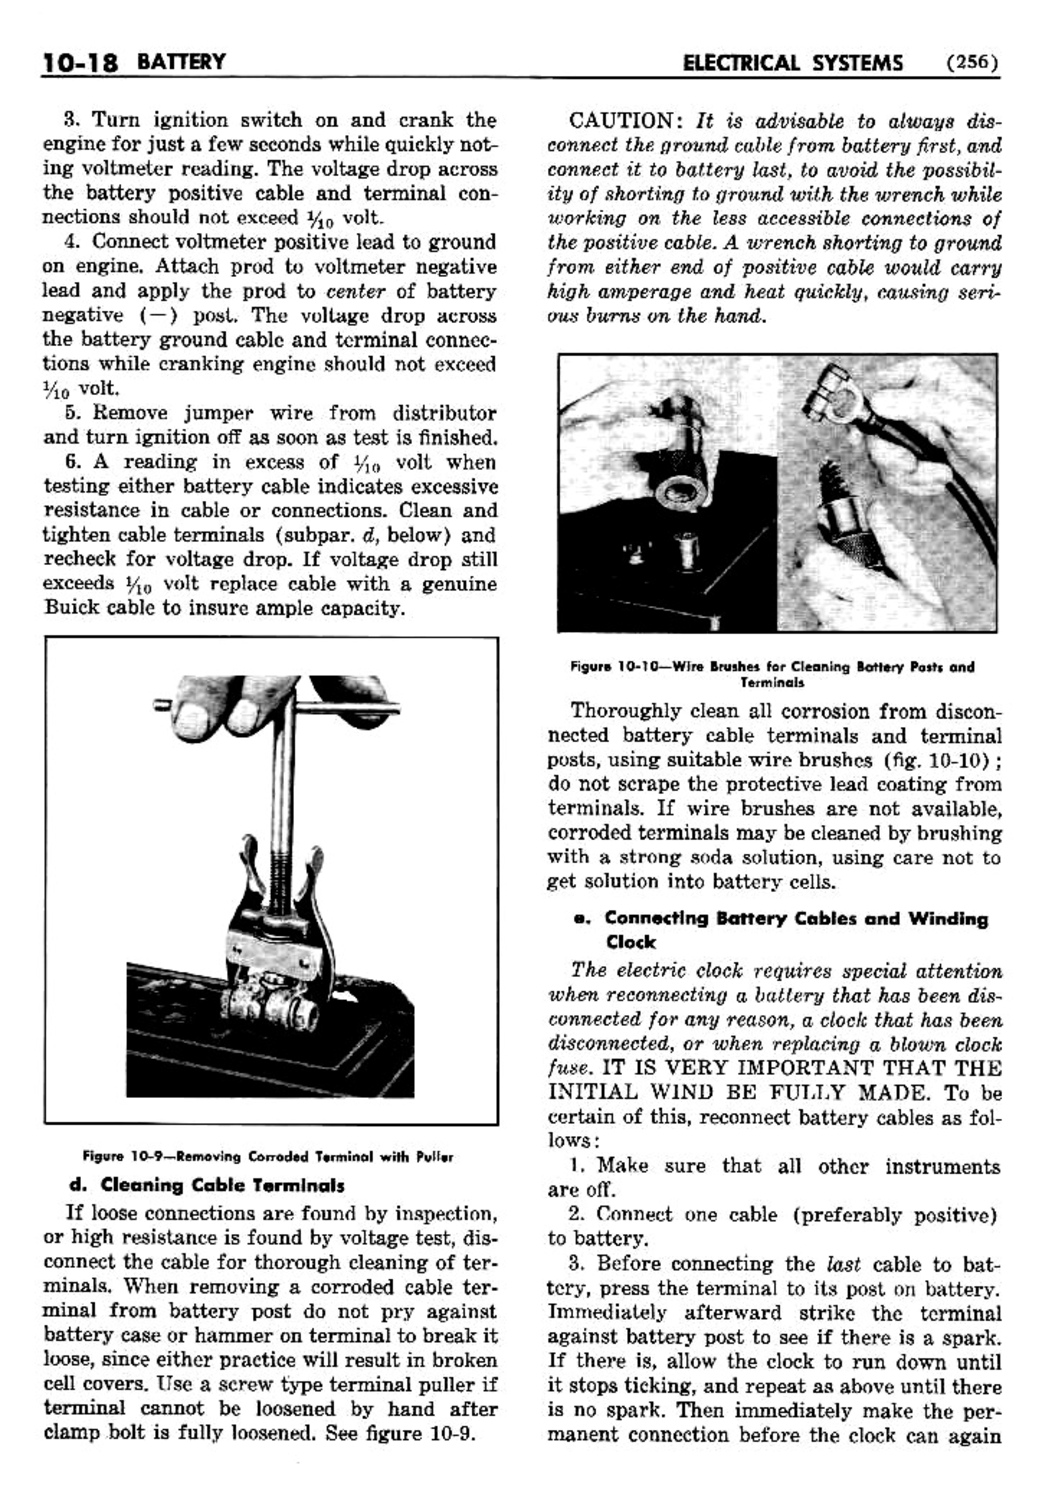 n_11 1950 Buick Shop Manual - Electrical Systems-018-018.jpg